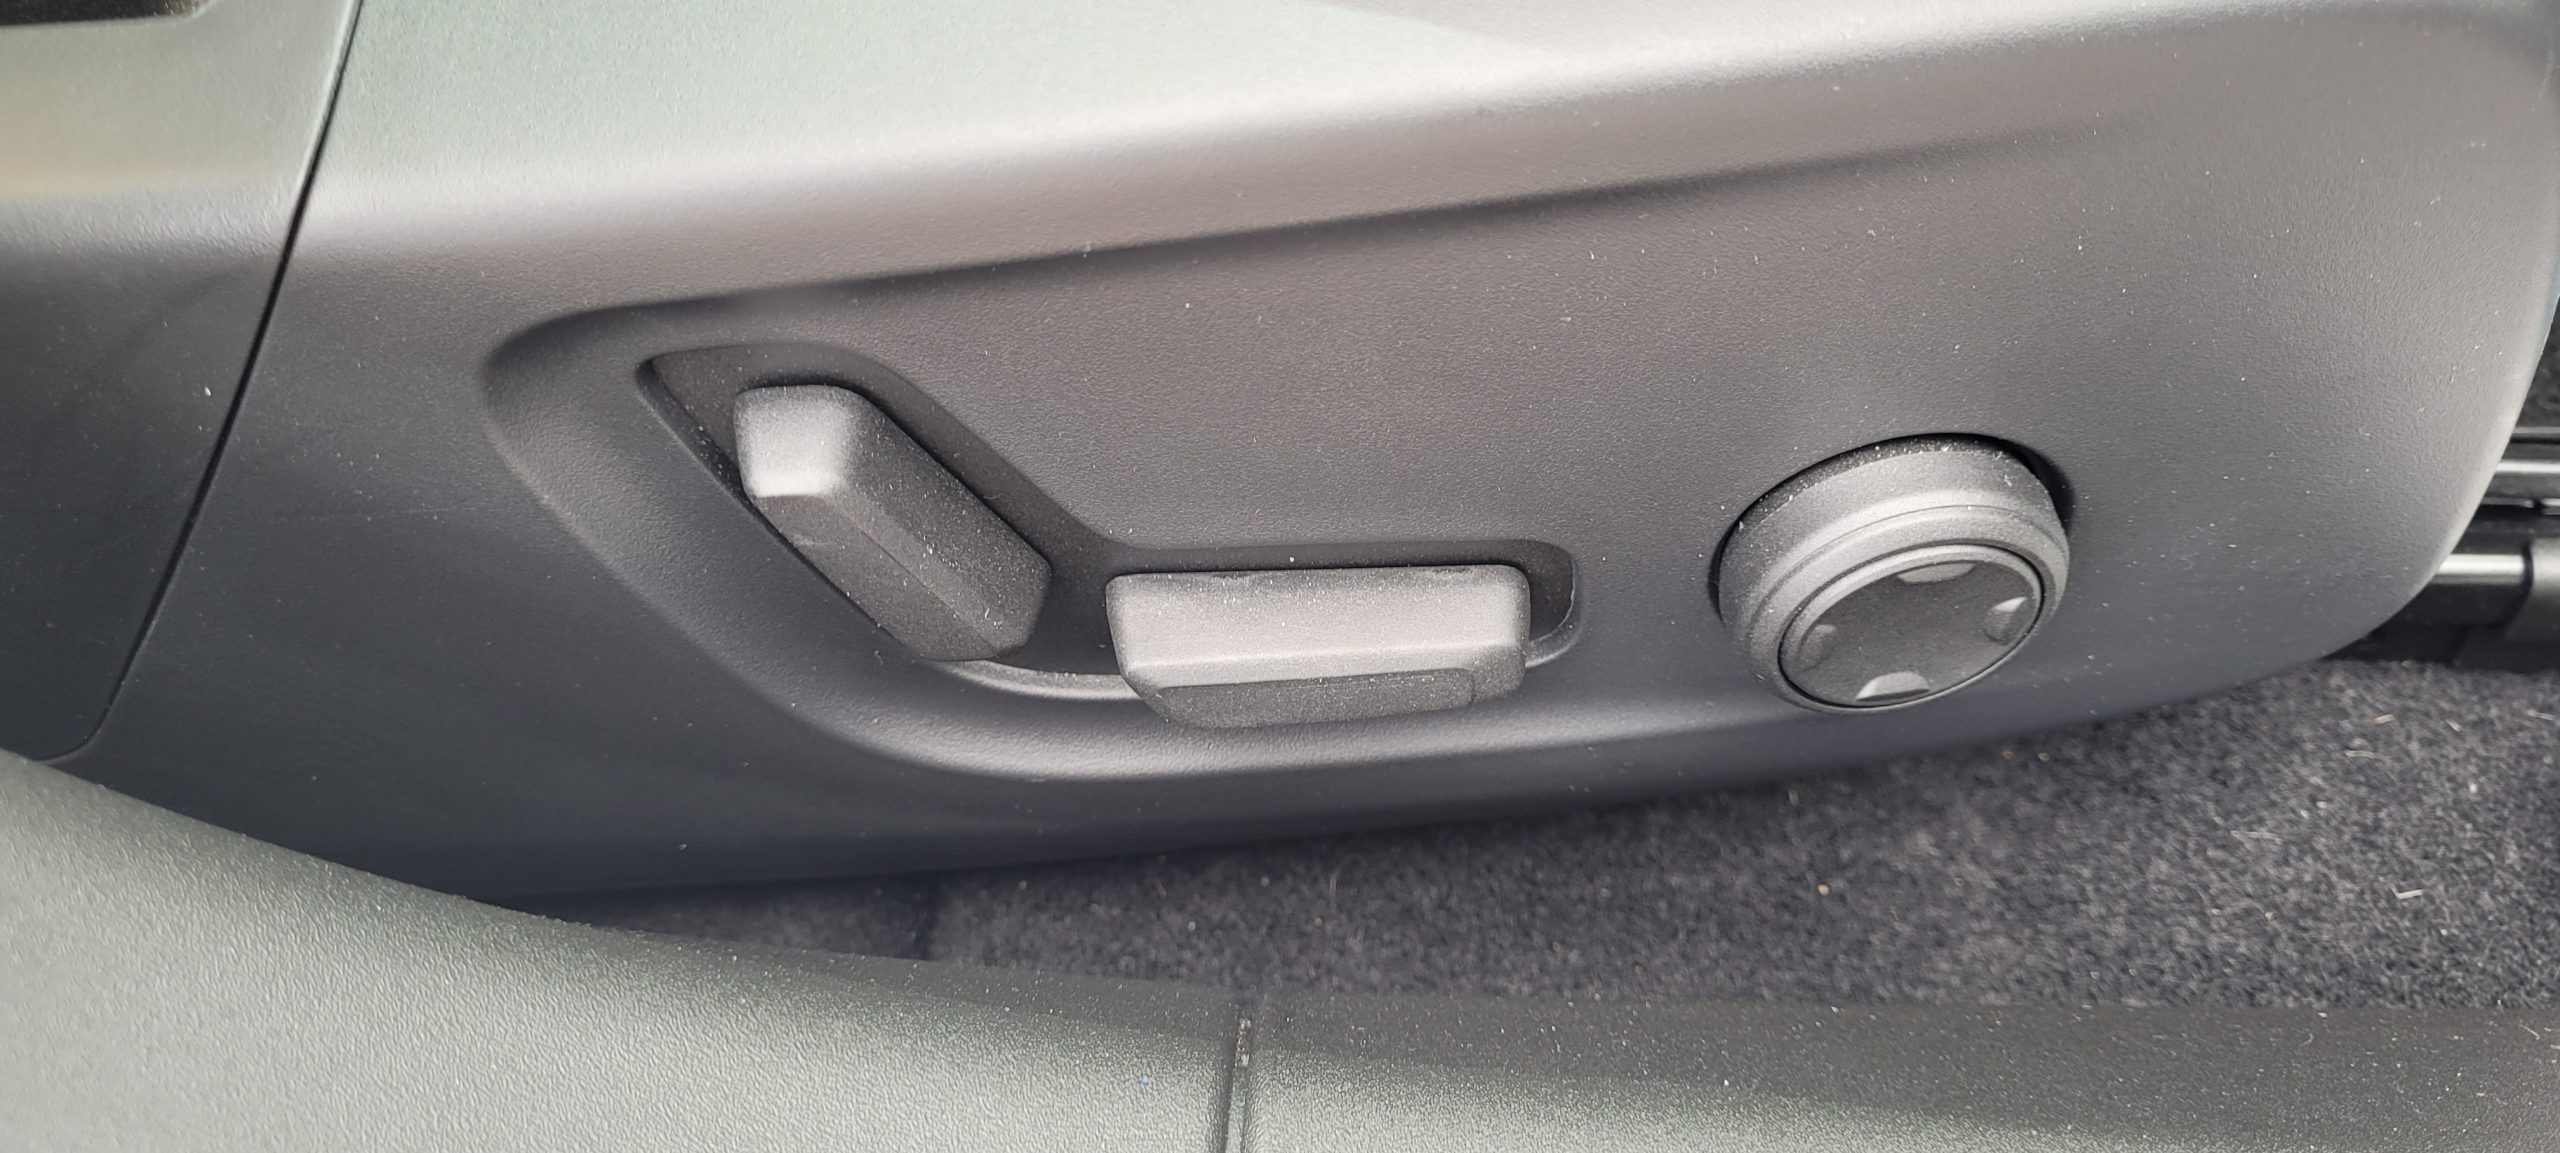 17) Front seat electronic adjustment controls in Polestar 2